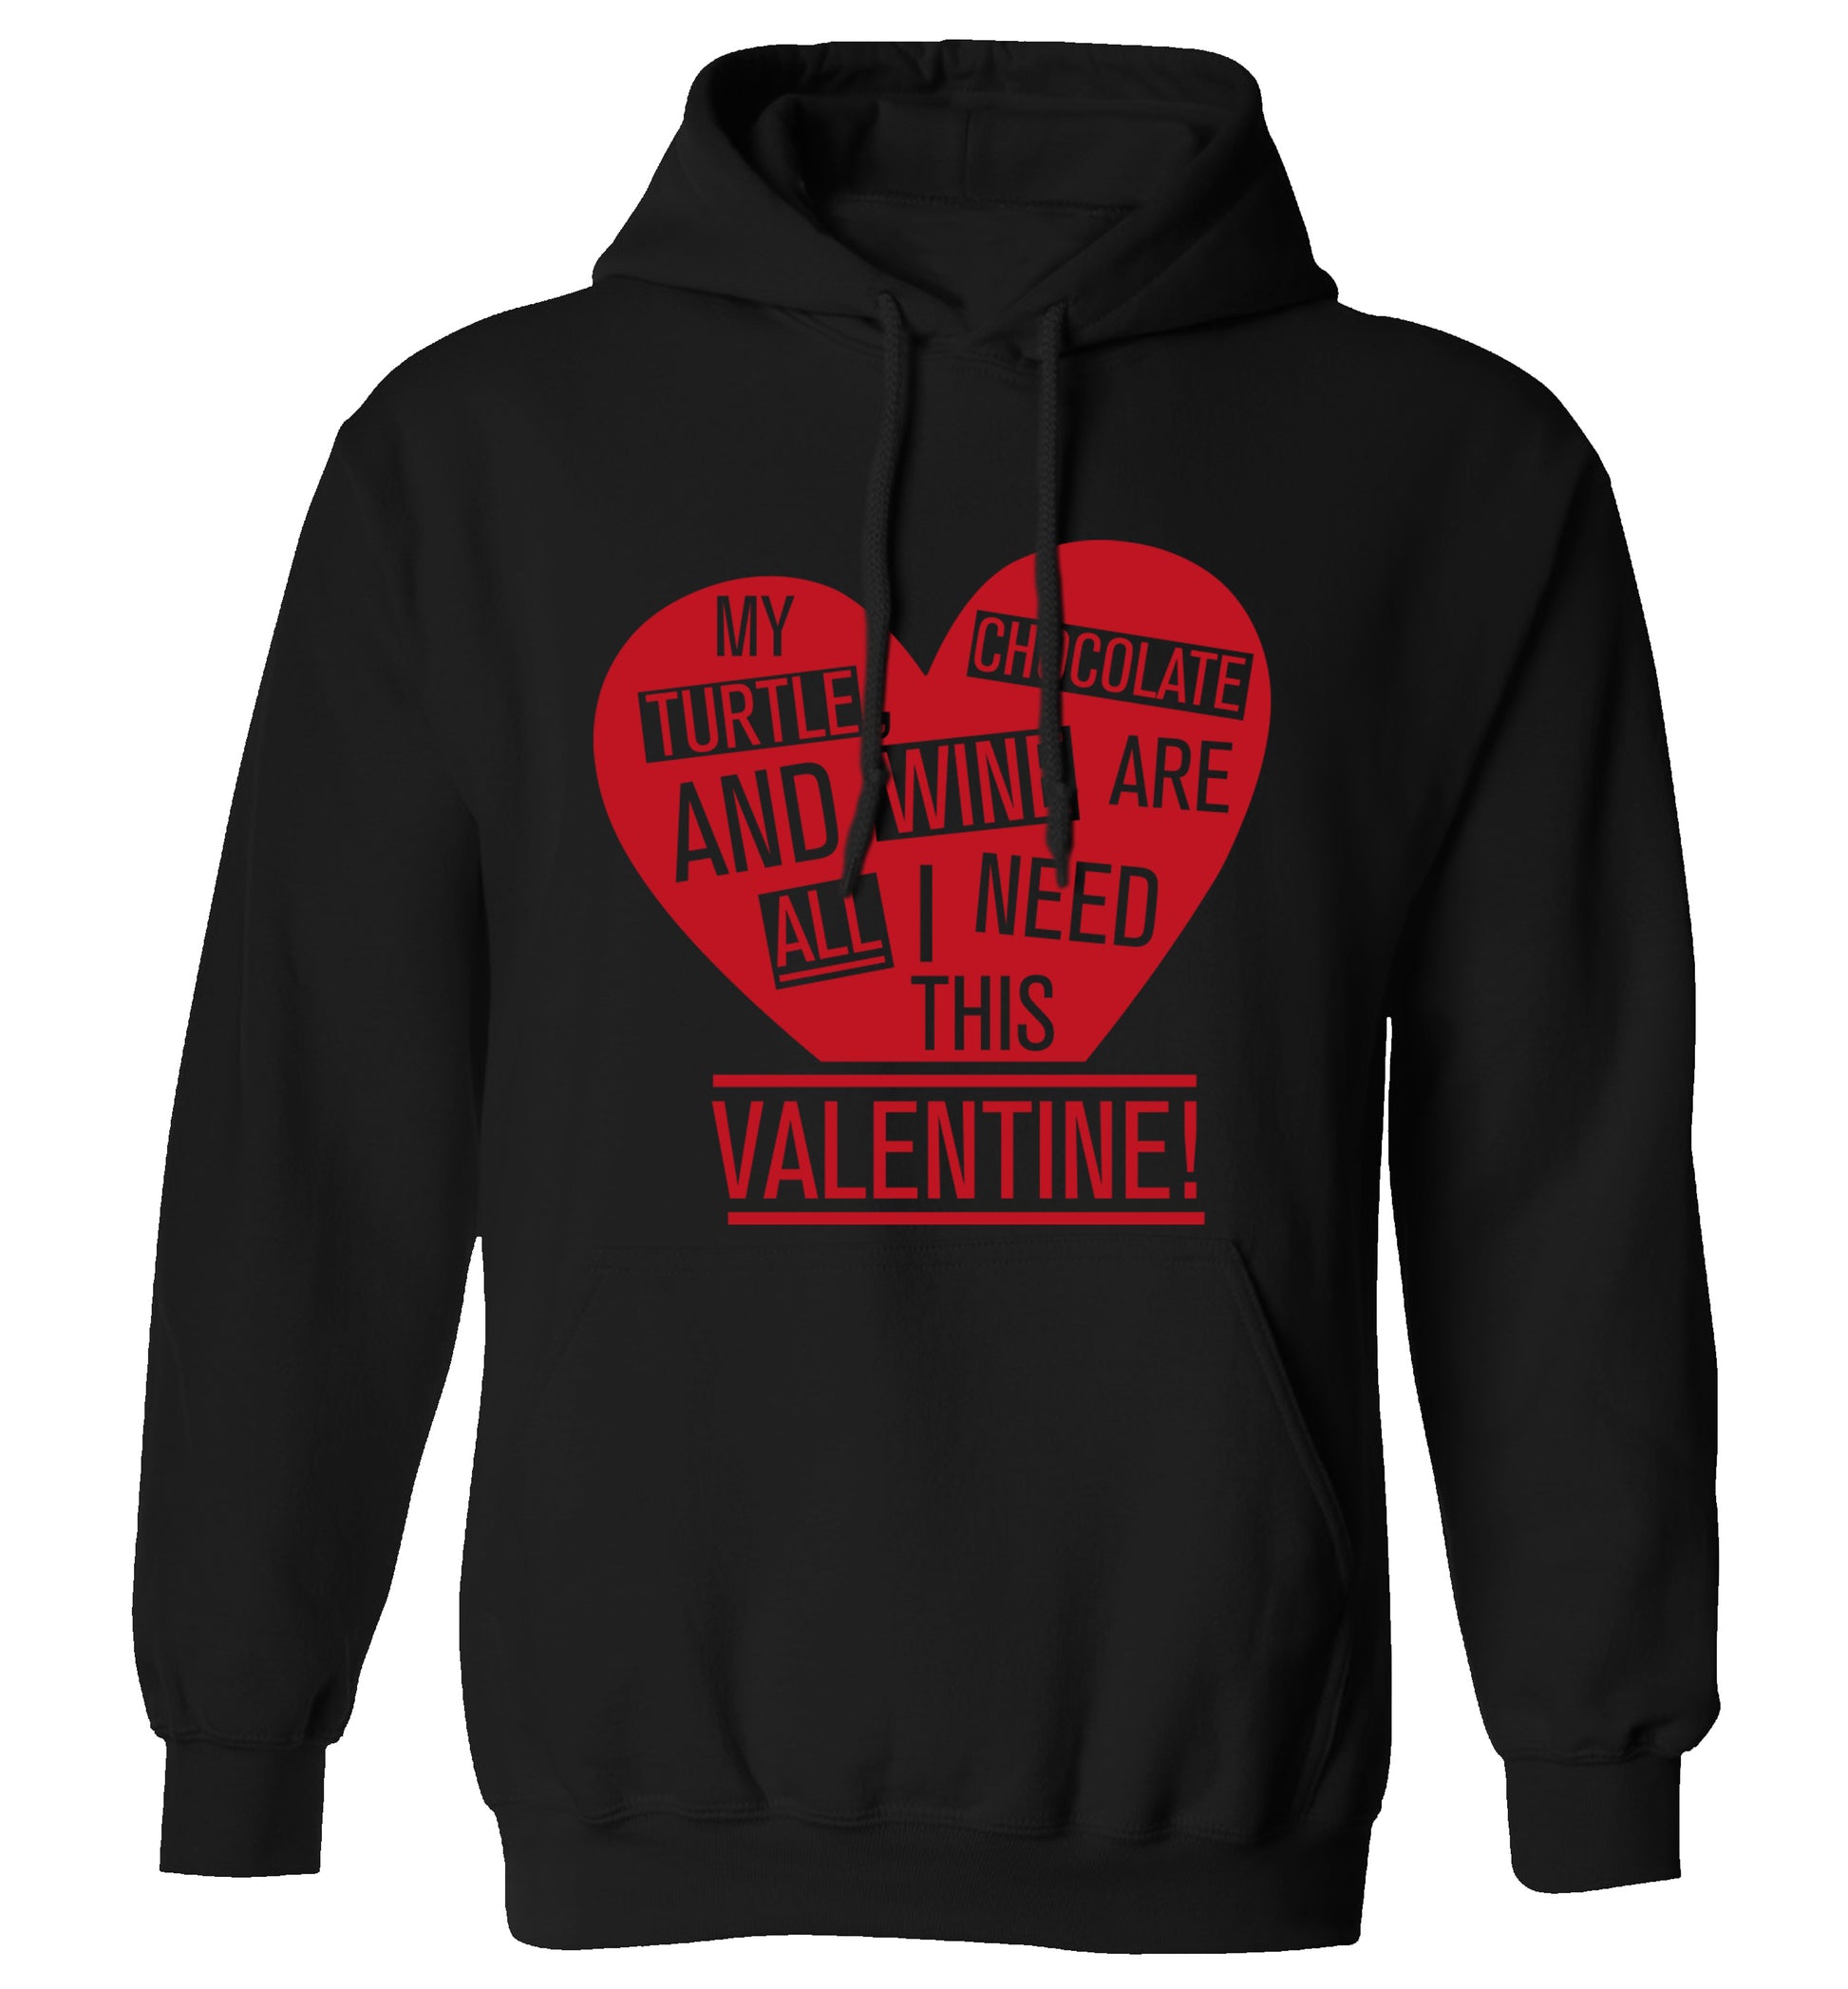 My turtle, chocolate and wine are all I need this valentine! adults unisex black hoodie 2XL